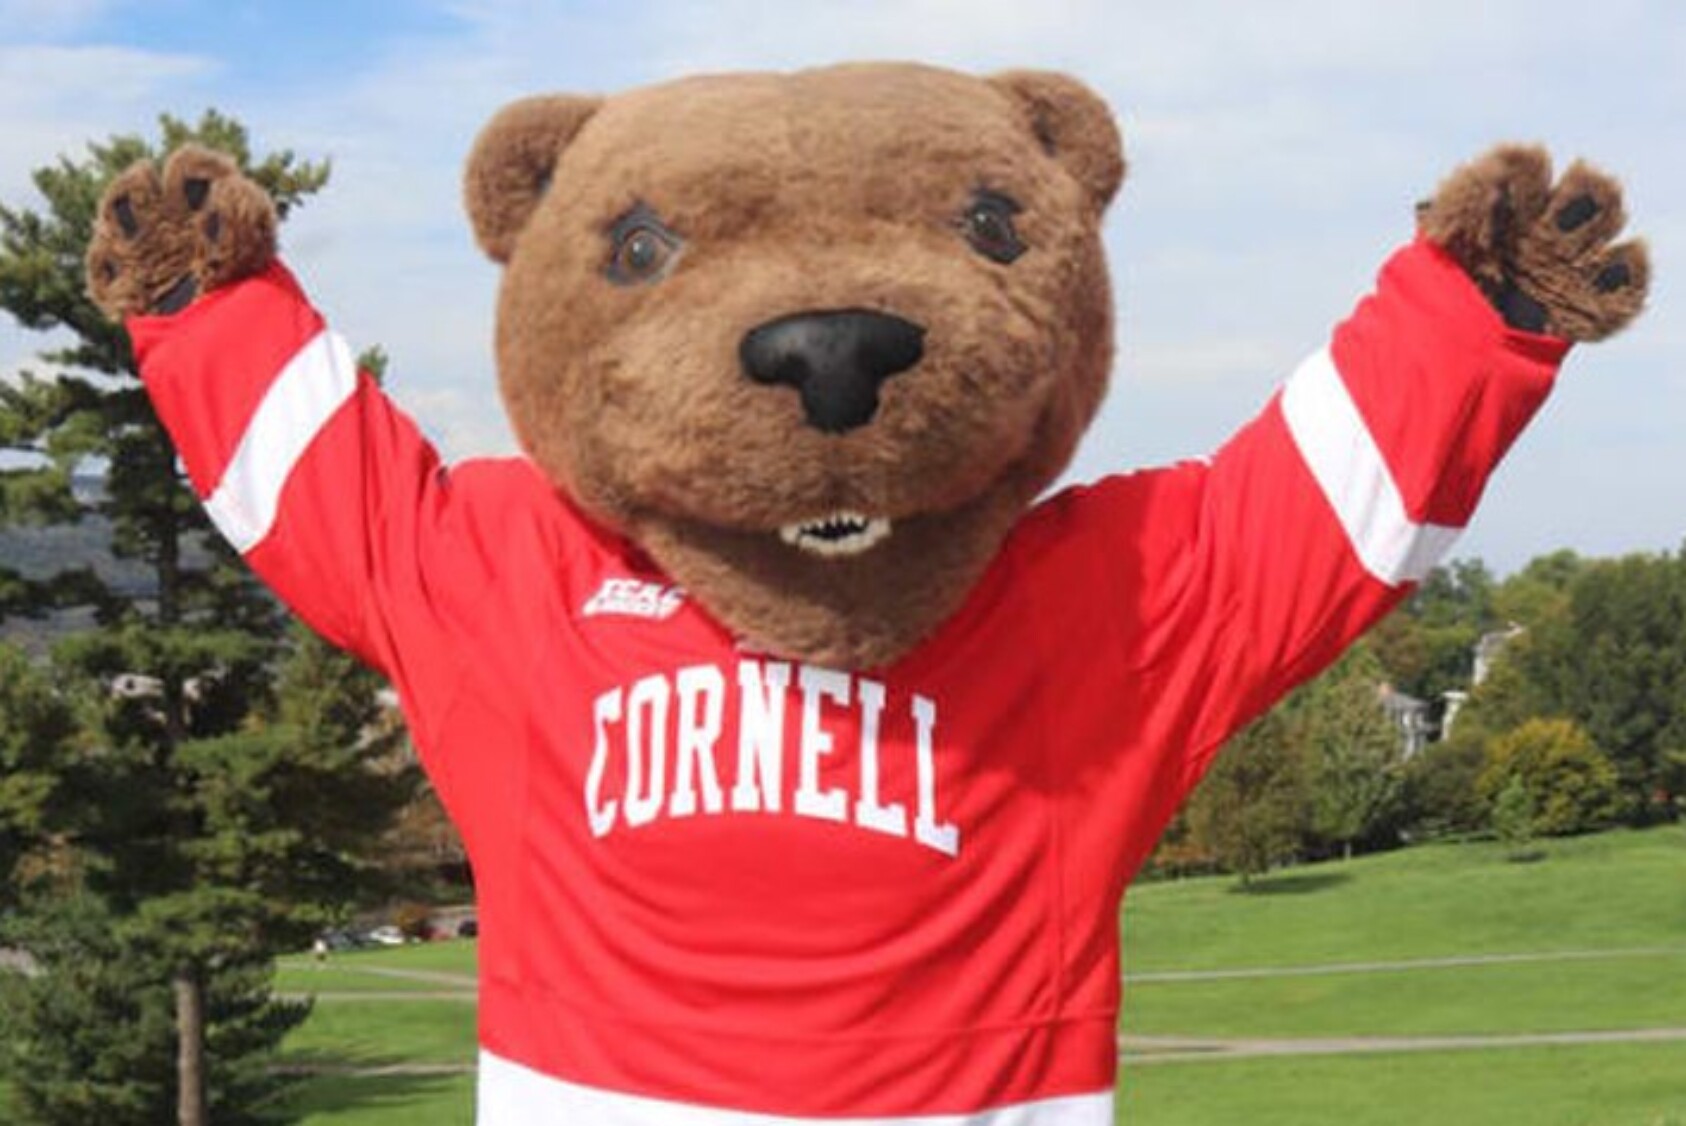 Help Big Red Bears purchase a limited use vehicle (street-legal golf cart) to transport Touchdown the Bear mascot to the many events he appears at around campus.